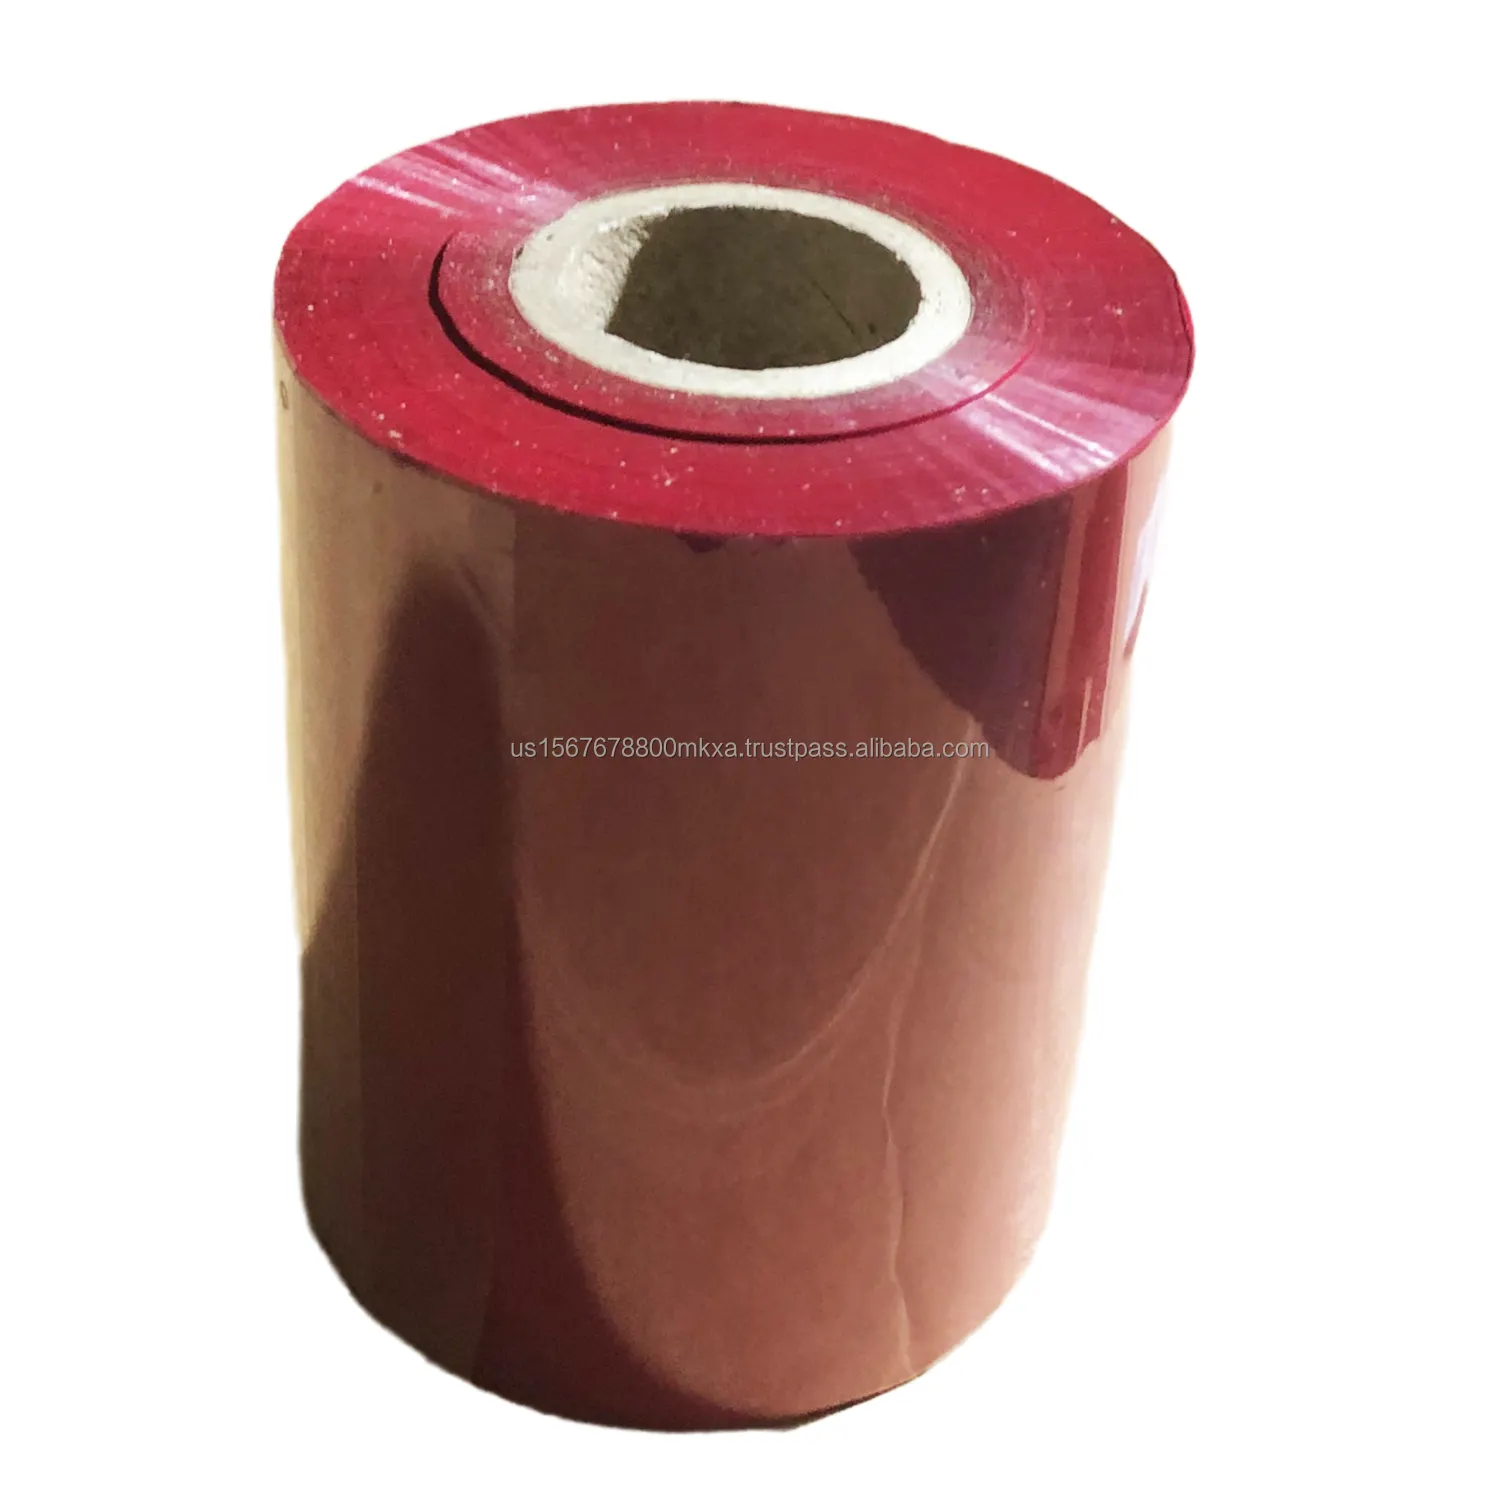 110mmx300m 4.33" x 984' Color red factory price barcode printer thermal transfer wax resin ribbon  barcode jumbo roll